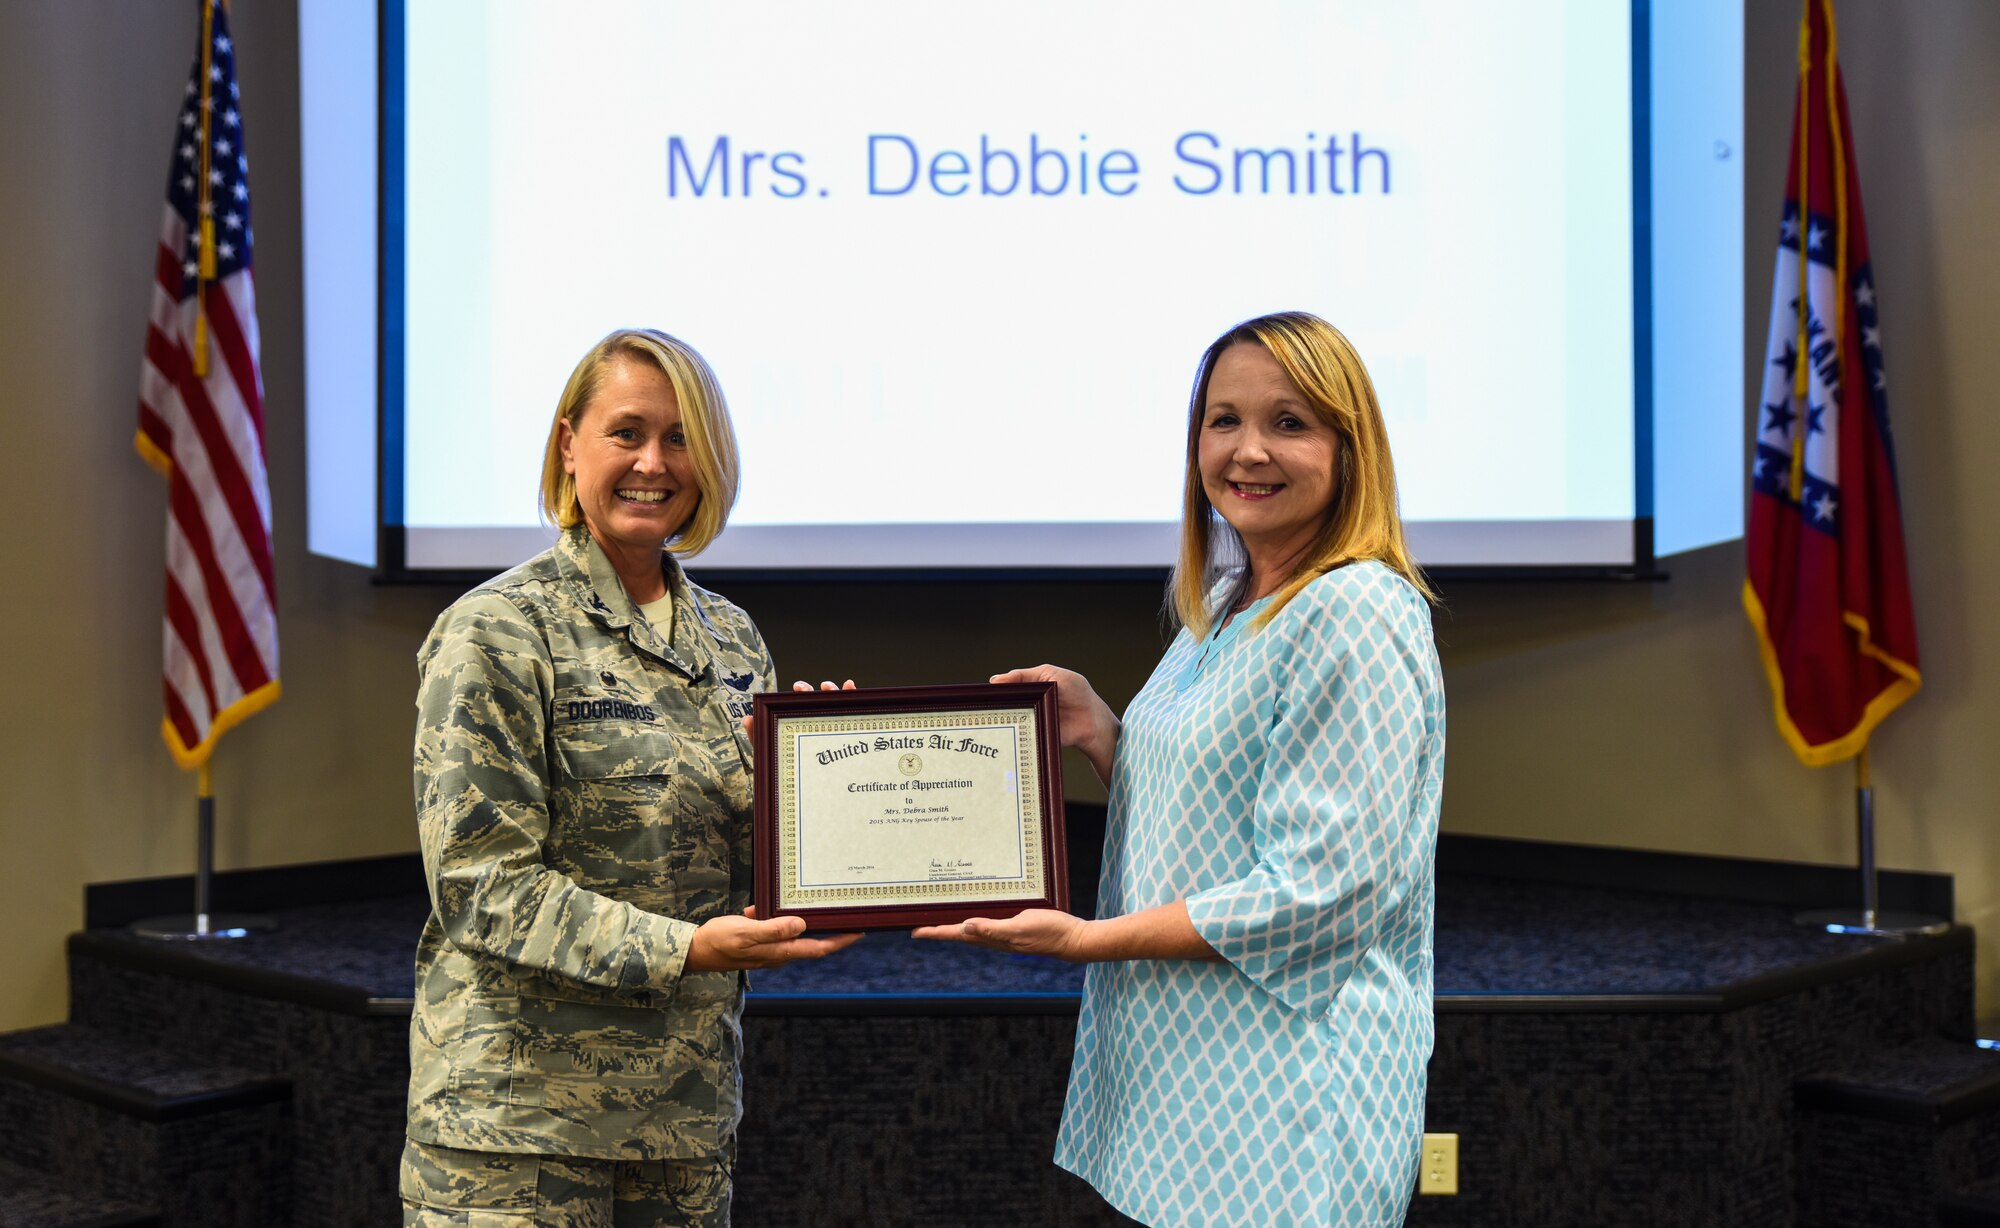 Debbie Smith, key volunteer, is presented the 2015 Air National Guard Key Spouse of the Year award by Col. Bobbi Doorenbos, 188th Wing commander, Aug. 6, 2016, for being an invaluable member of the 188th Airman and Family Readiness Office's Key Volunteer Program and a proven leader with her husband, Col. Thomas Smith, at Ebbing Air National Guard Base, Fort Smith, Ark. Smith has also previously won the 2013 and 2015 Wing Volunteer of the Year award and the 2015 Region Six Volunteer of the Year award. (U.S. Air National Guard photo by Senior Airman Cody Martin)